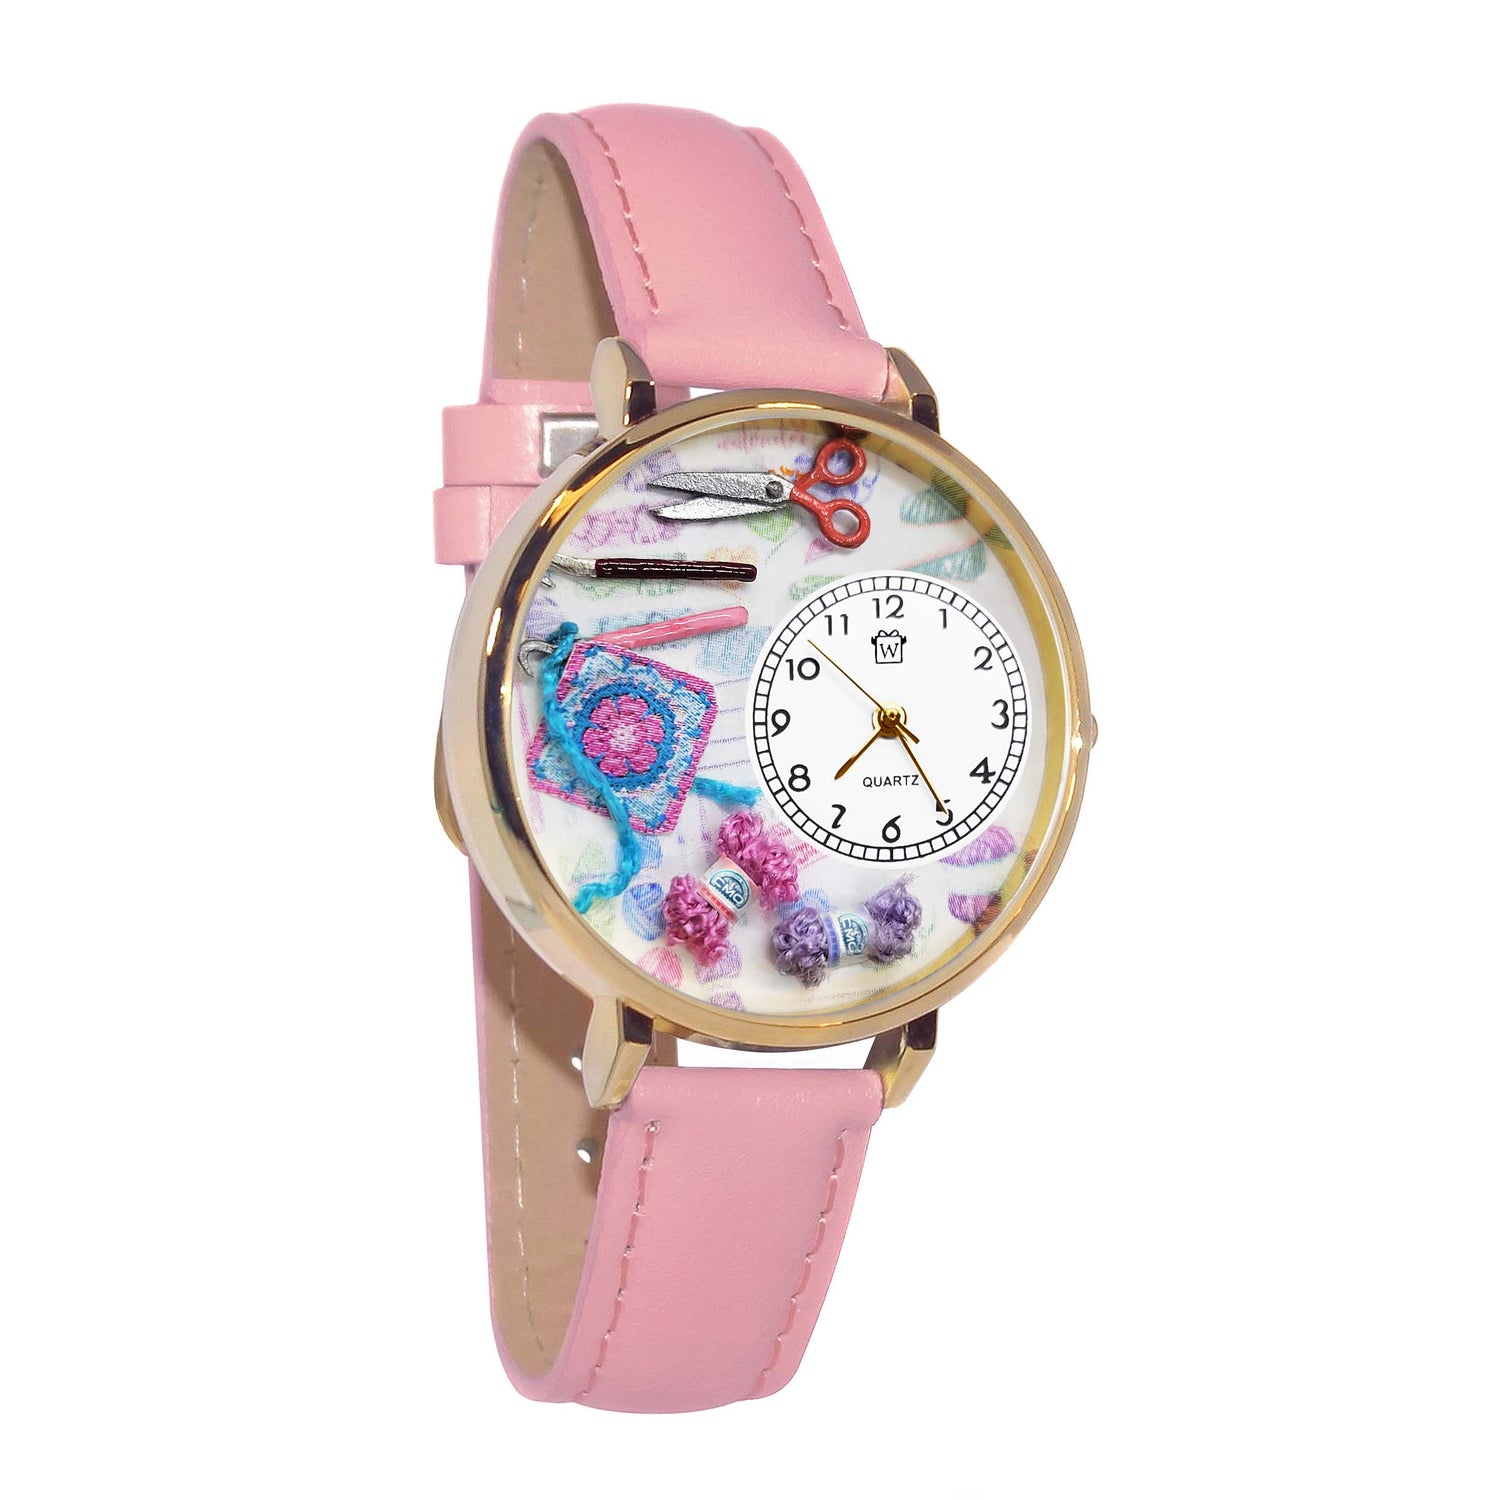 Whimsical Gifts | Crochet 3D Watch Large Style | Handmade in USA | Hobbies & Special Interests | Sewing & Crafting | Novelty Unique Fun Miniatures Gift | Silver Finish Pink Leather Watch Band